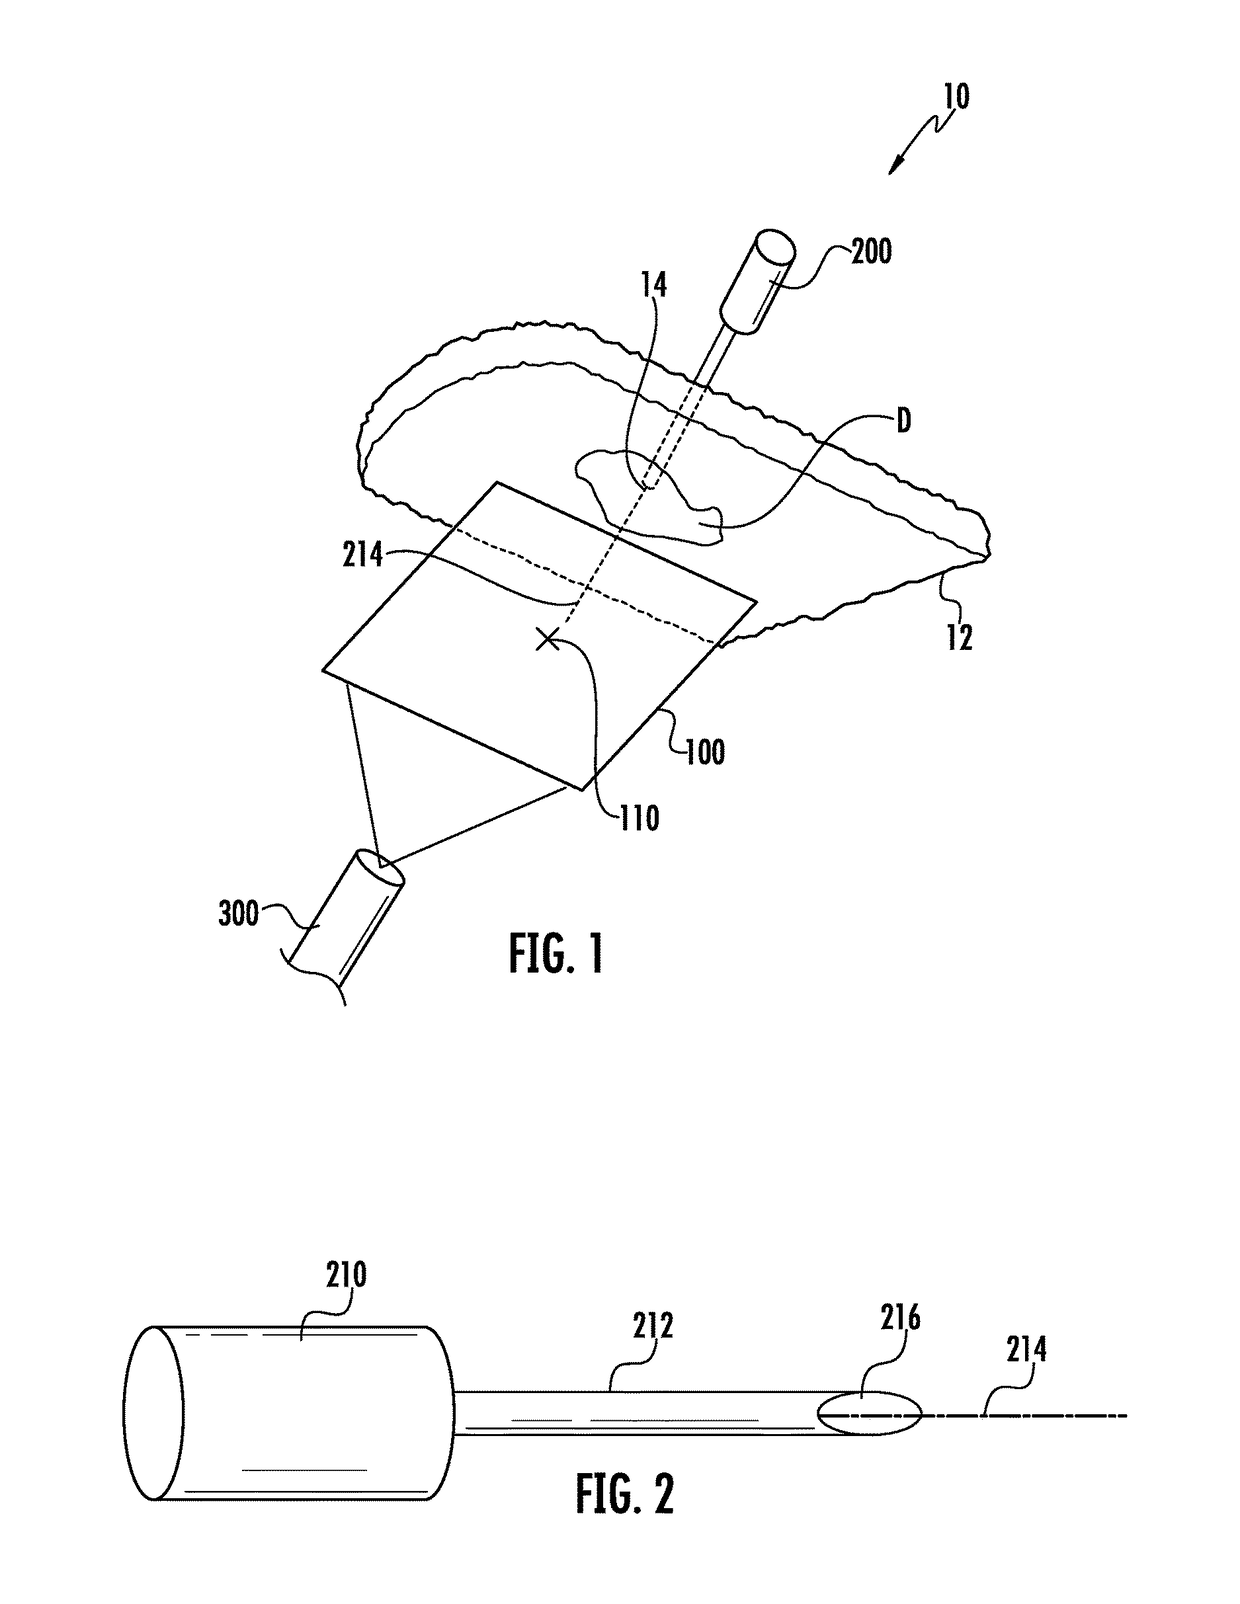 Hernia mesh placement system and method for in-situ surgical applications